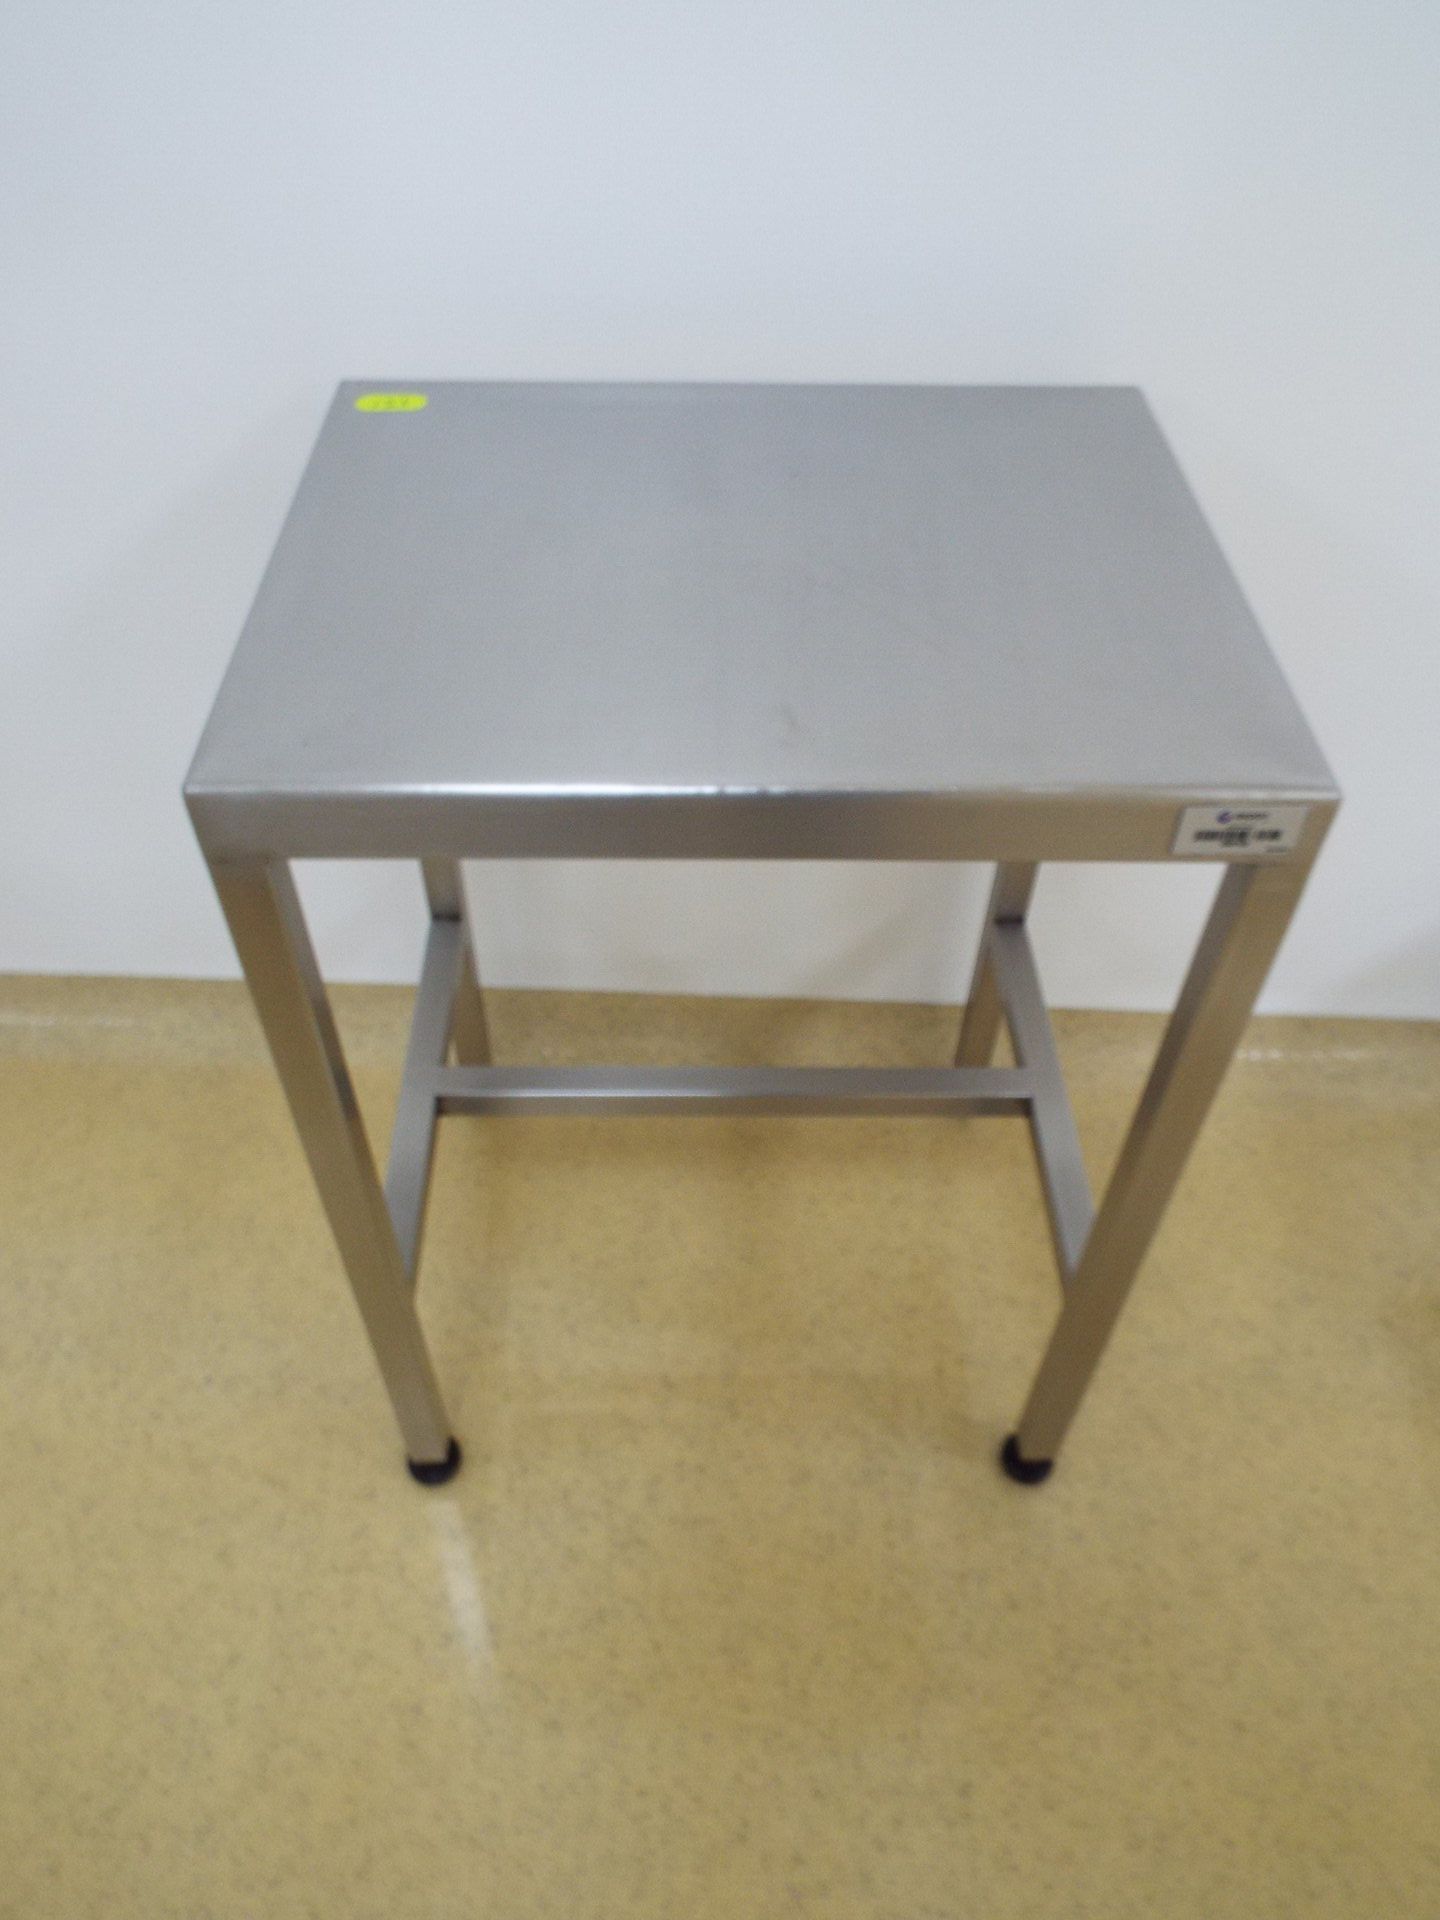 (3) Stainless Steel Stools